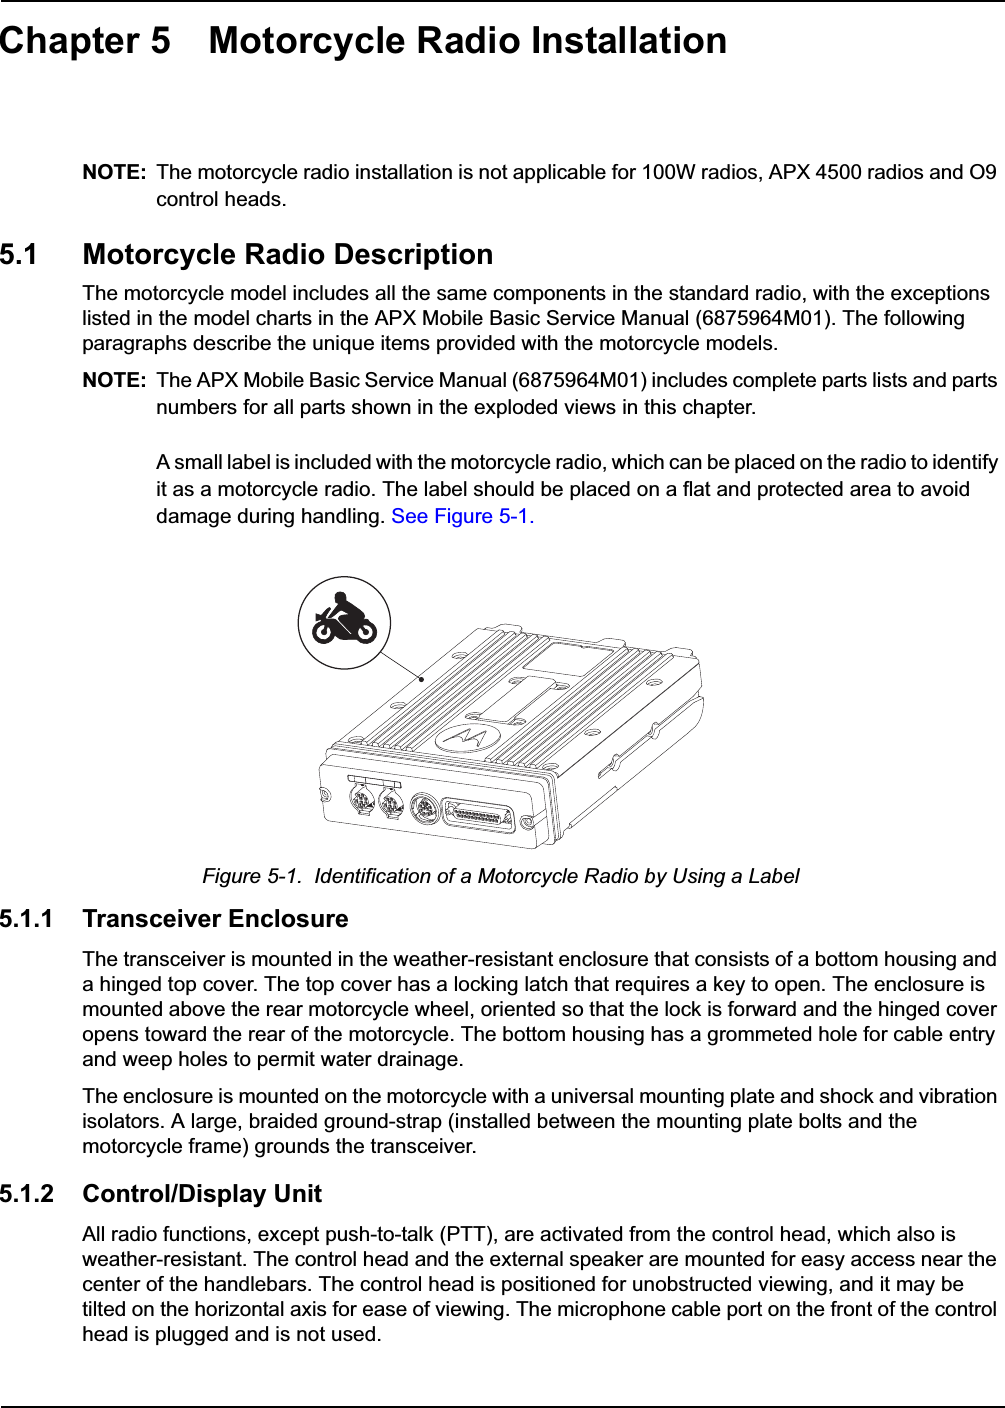 Chapter 5 Motorcycle Radio InstallationNOTE: The motorcycle radio installation is not applicable for 100W radios, APX 4500 radios and O9 control heads.5.1 Motorcycle Radio DescriptionThe motorcycle model includes all the same components in the standard radio, with the exceptions listed in the model charts in the APX Mobile Basic Service Manual (6875964M01). The following paragraphs describe the unique items provided with the motorcycle models. NOTE: The APX Mobile Basic Service Manual (6875964M01) includes complete parts lists and parts numbers for all parts shown in the exploded views in this chapter.A small label is included with the motorcycle radio, which can be placed on the radio to identify it as a motorcycle radio. The label should be placed on a flat and protected area to avoid damage during handling. See Figure 5-1.Figure 5-1.  Identification of a Motorcycle Radio by Using a Label5.1.1 Transceiver EnclosureThe transceiver is mounted in the weather-resistant enclosure that consists of a bottom housing and a hinged top cover. The top cover has a locking latch that requires a key to open. The enclosure is mounted above the rear motorcycle wheel, oriented so that the lock is forward and the hinged cover opens toward the rear of the motorcycle. The bottom housing has a grommeted hole for cable entry and weep holes to permit water drainage.The enclosure is mounted on the motorcycle with a universal mounting plate and shock and vibration isolators. A large, braided ground-strap (installed between the mounting plate bolts and the motorcycle frame) grounds the transceiver.5.1.2 Control/Display UnitAll radio functions, except push-to-talk (PTT), are activated from the control head, which also is weather-resistant. The control head and the external speaker are mounted for easy access near the center of the handlebars. The control head is positioned for unobstructed viewing, and it may be tilted on the horizontal axis for ease of viewing. The microphone cable port on the front of the control head is plugged and is not used. 